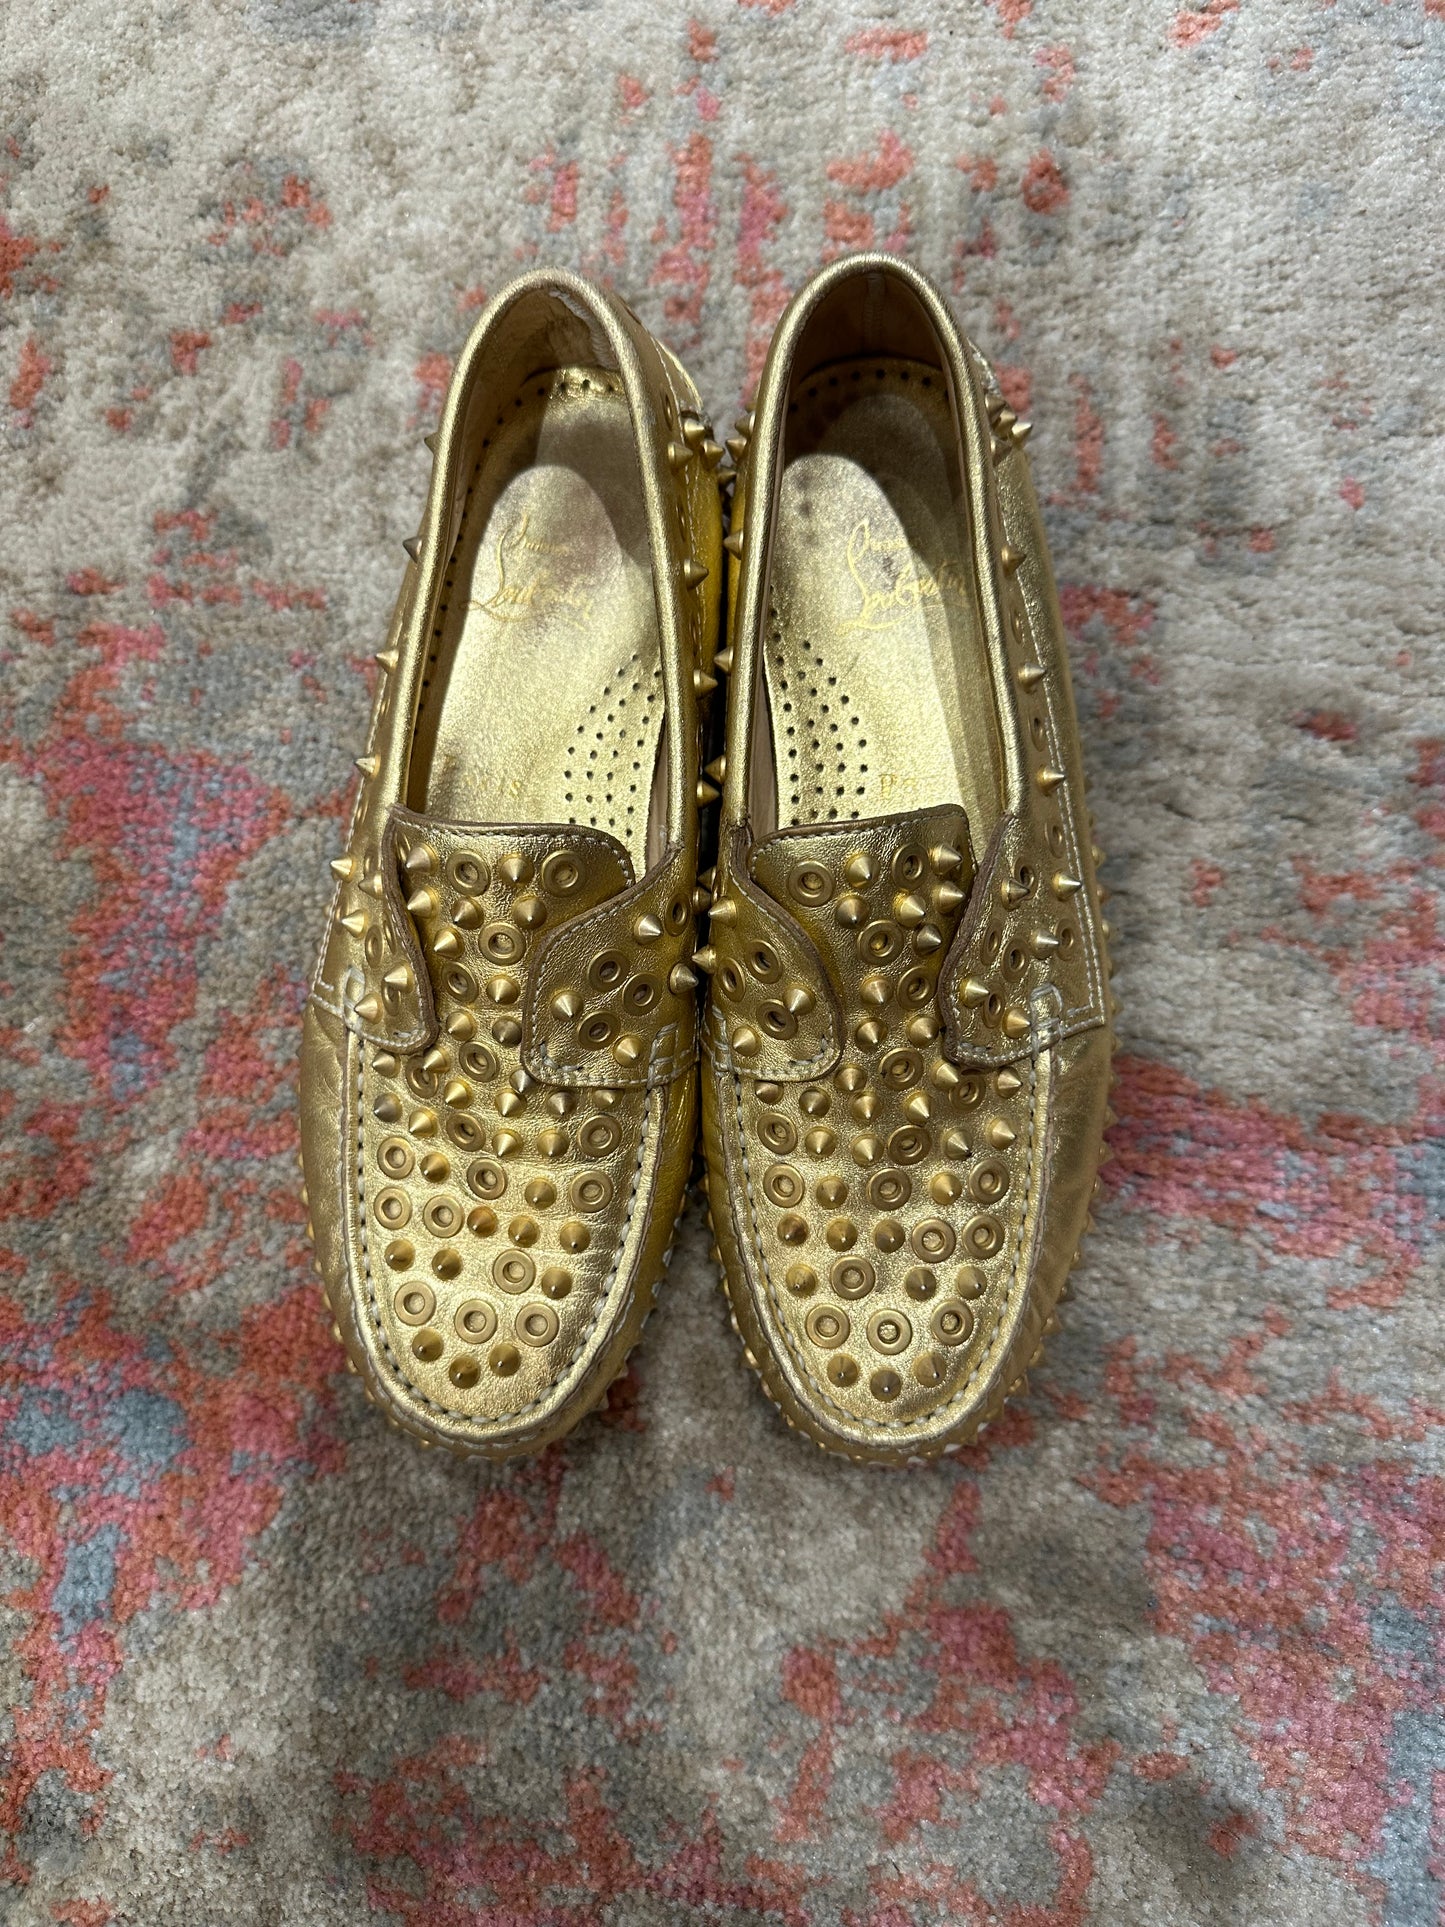 Christian Louboutin Yacht Gold Spiked Loafer - Size 38